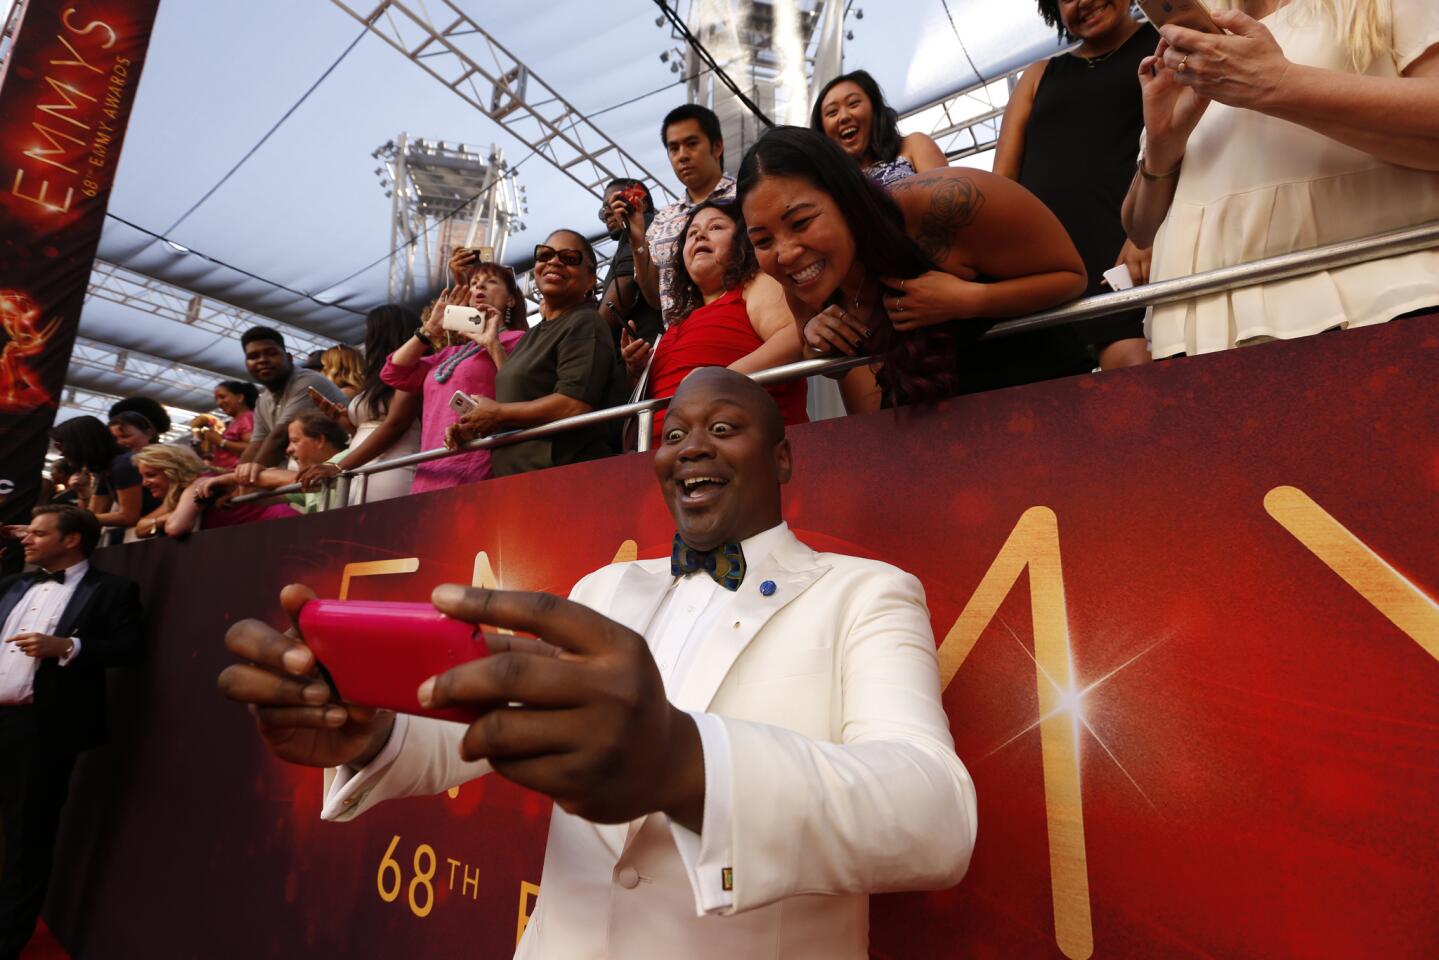 Emmys 2016: Candid photos from the red carpet